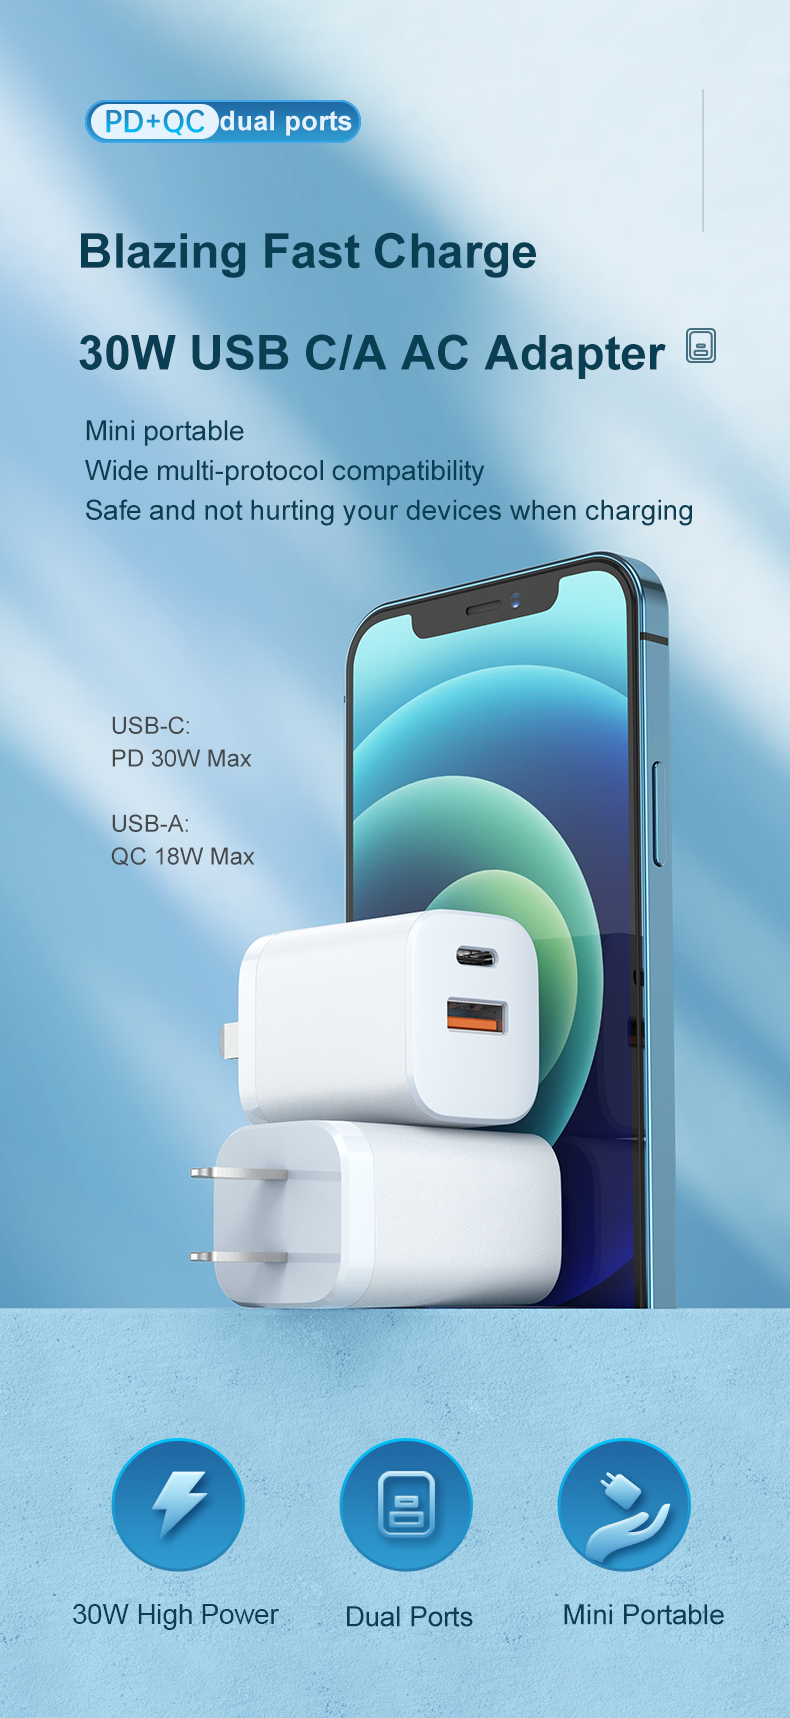 USB Fast Charge Details